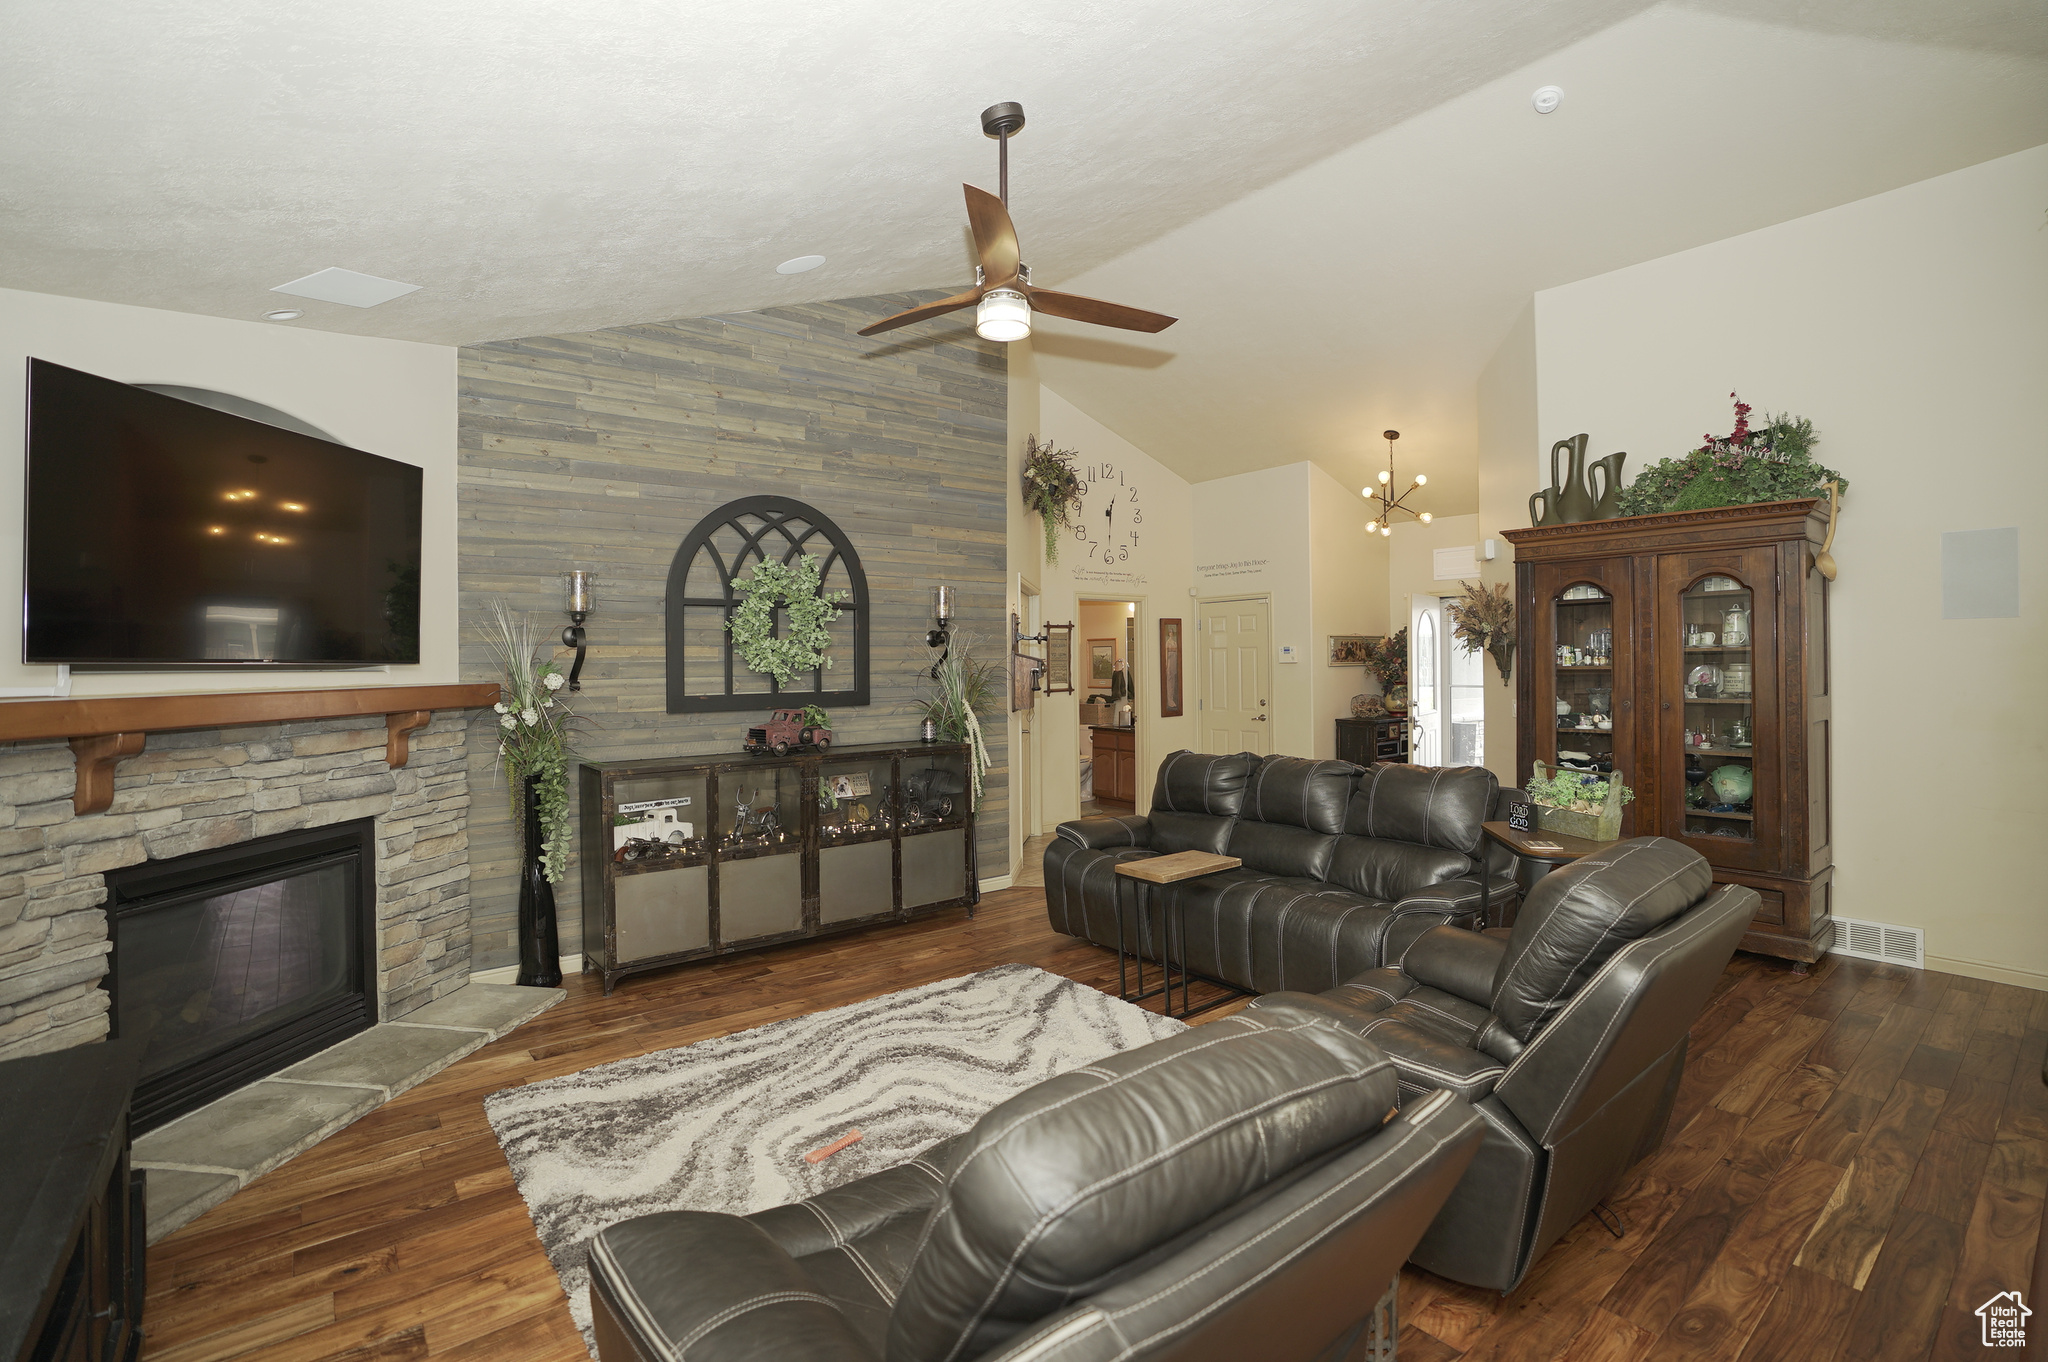 Living room with a stone fireplace, high vaulted ceiling, ceiling fan with notable chandelier, dark wood-type flooring, and wood walls